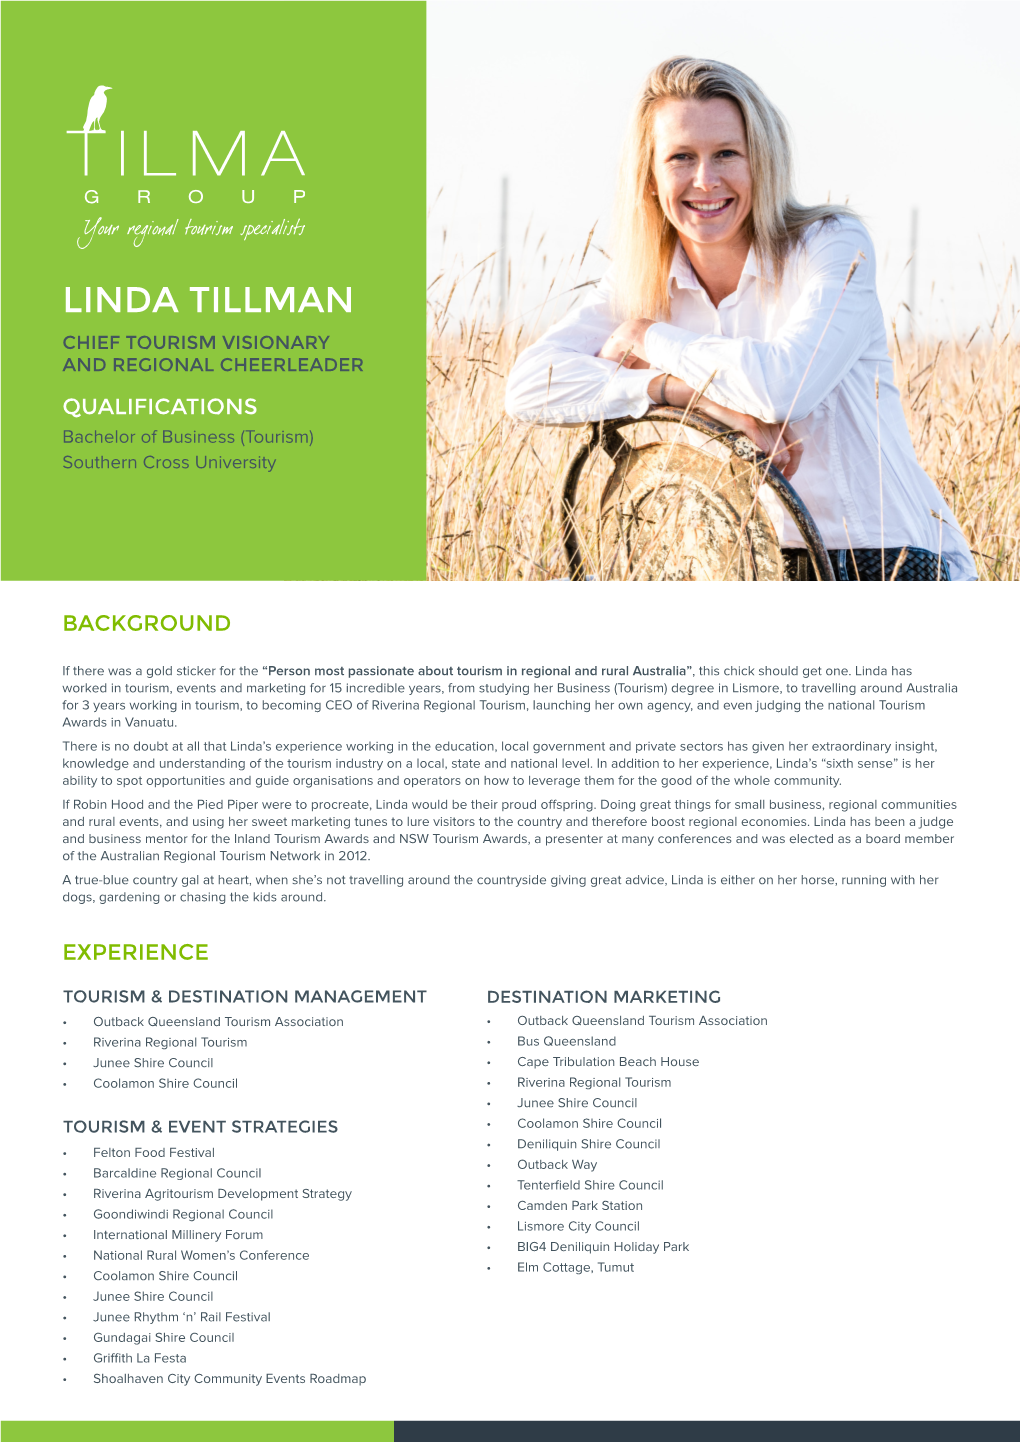 LINDA TILLMAN CHIEF TOURISM VISIONARY and REGIONAL CHEERLEADER QUALIFICATIONS Bachelor of Business (Tourism) Southern Cross University